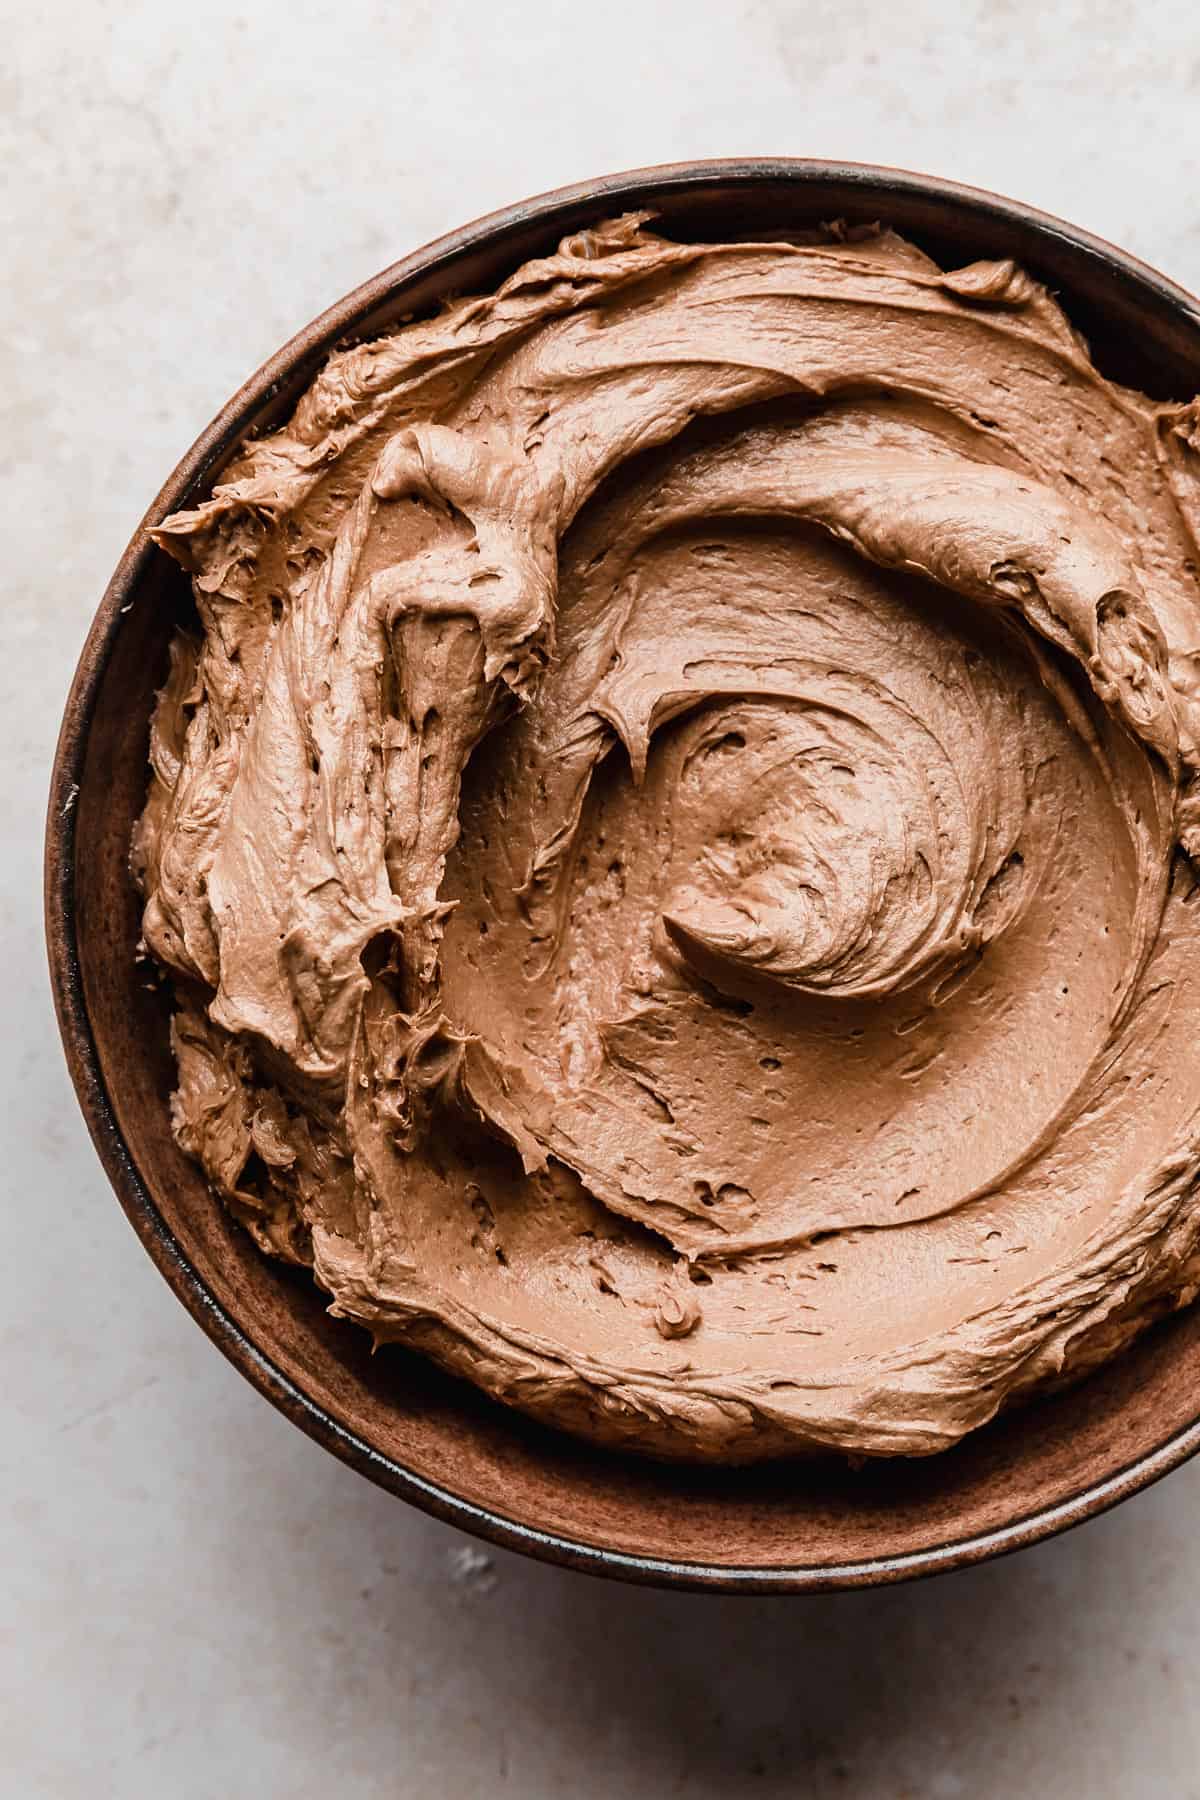 A brown bowl full of light brown colored Chocolate Buttercream with Melted Chocolate.